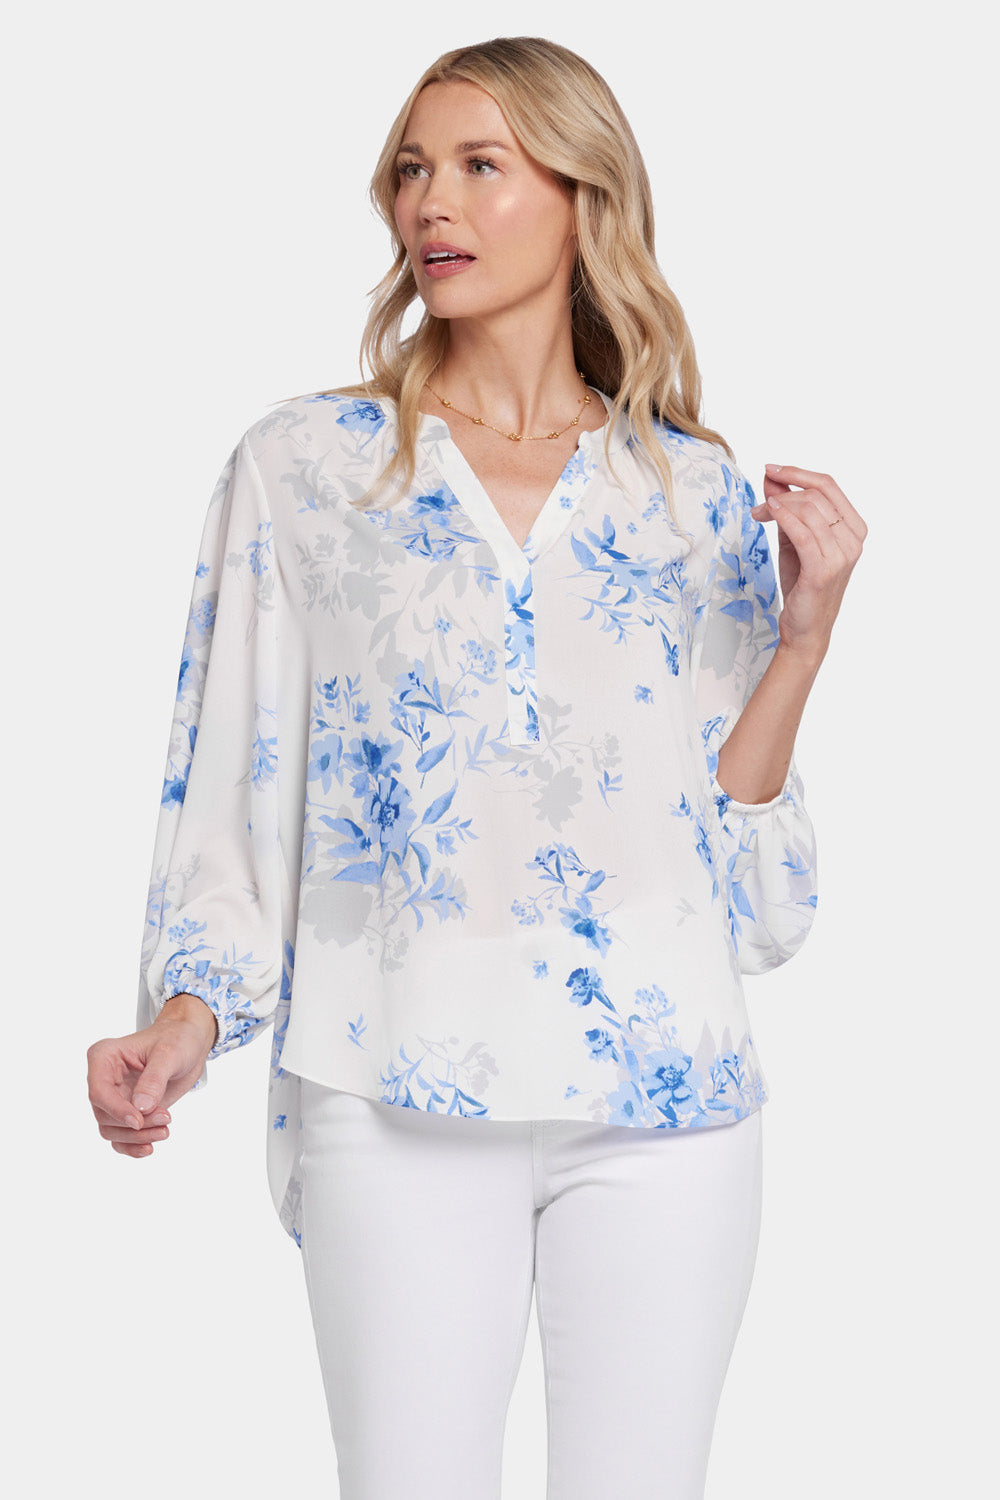 File:Work Outfit- Short Sleeved Cardigan, Floral Print Blouse